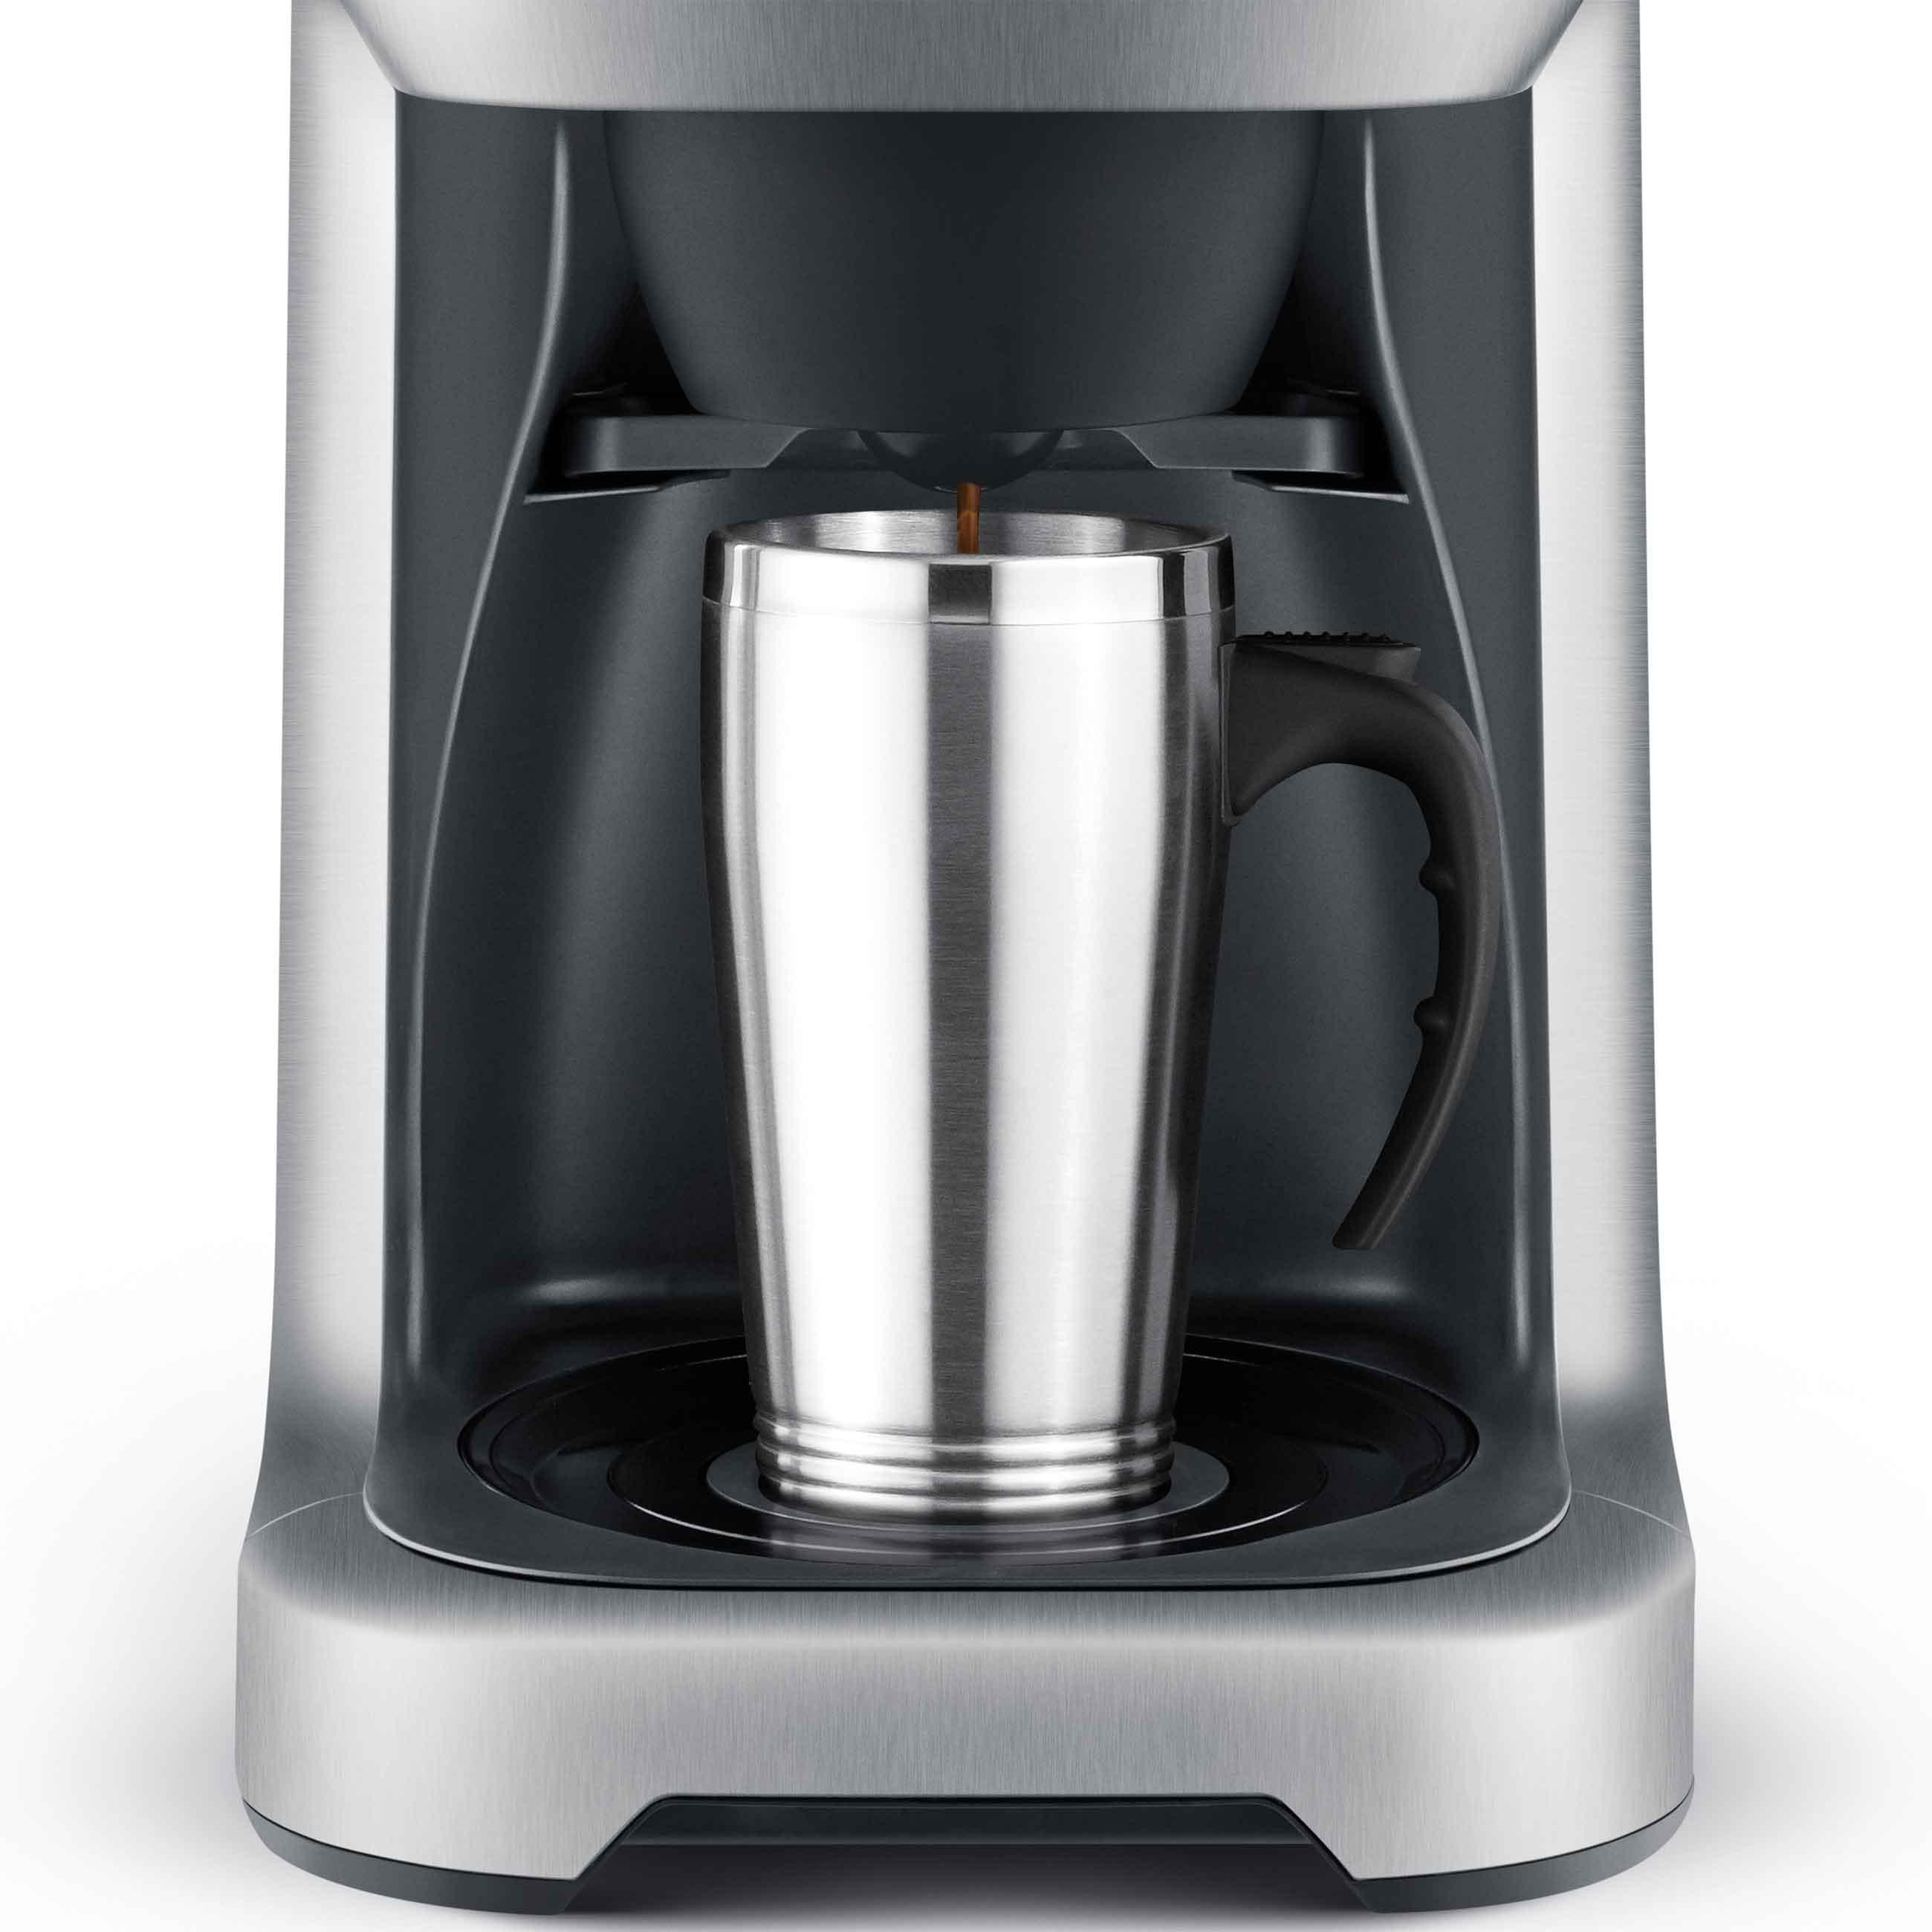 https://www.breville.com/content/dam/breville/ca/assets/coffee/finished-goods/bdc650-the-grind-control/bdc650bssusc-the-grind-control/images/BDC650BSSUSC-the-grind-control-beverages-coffee-carousel2.jpg